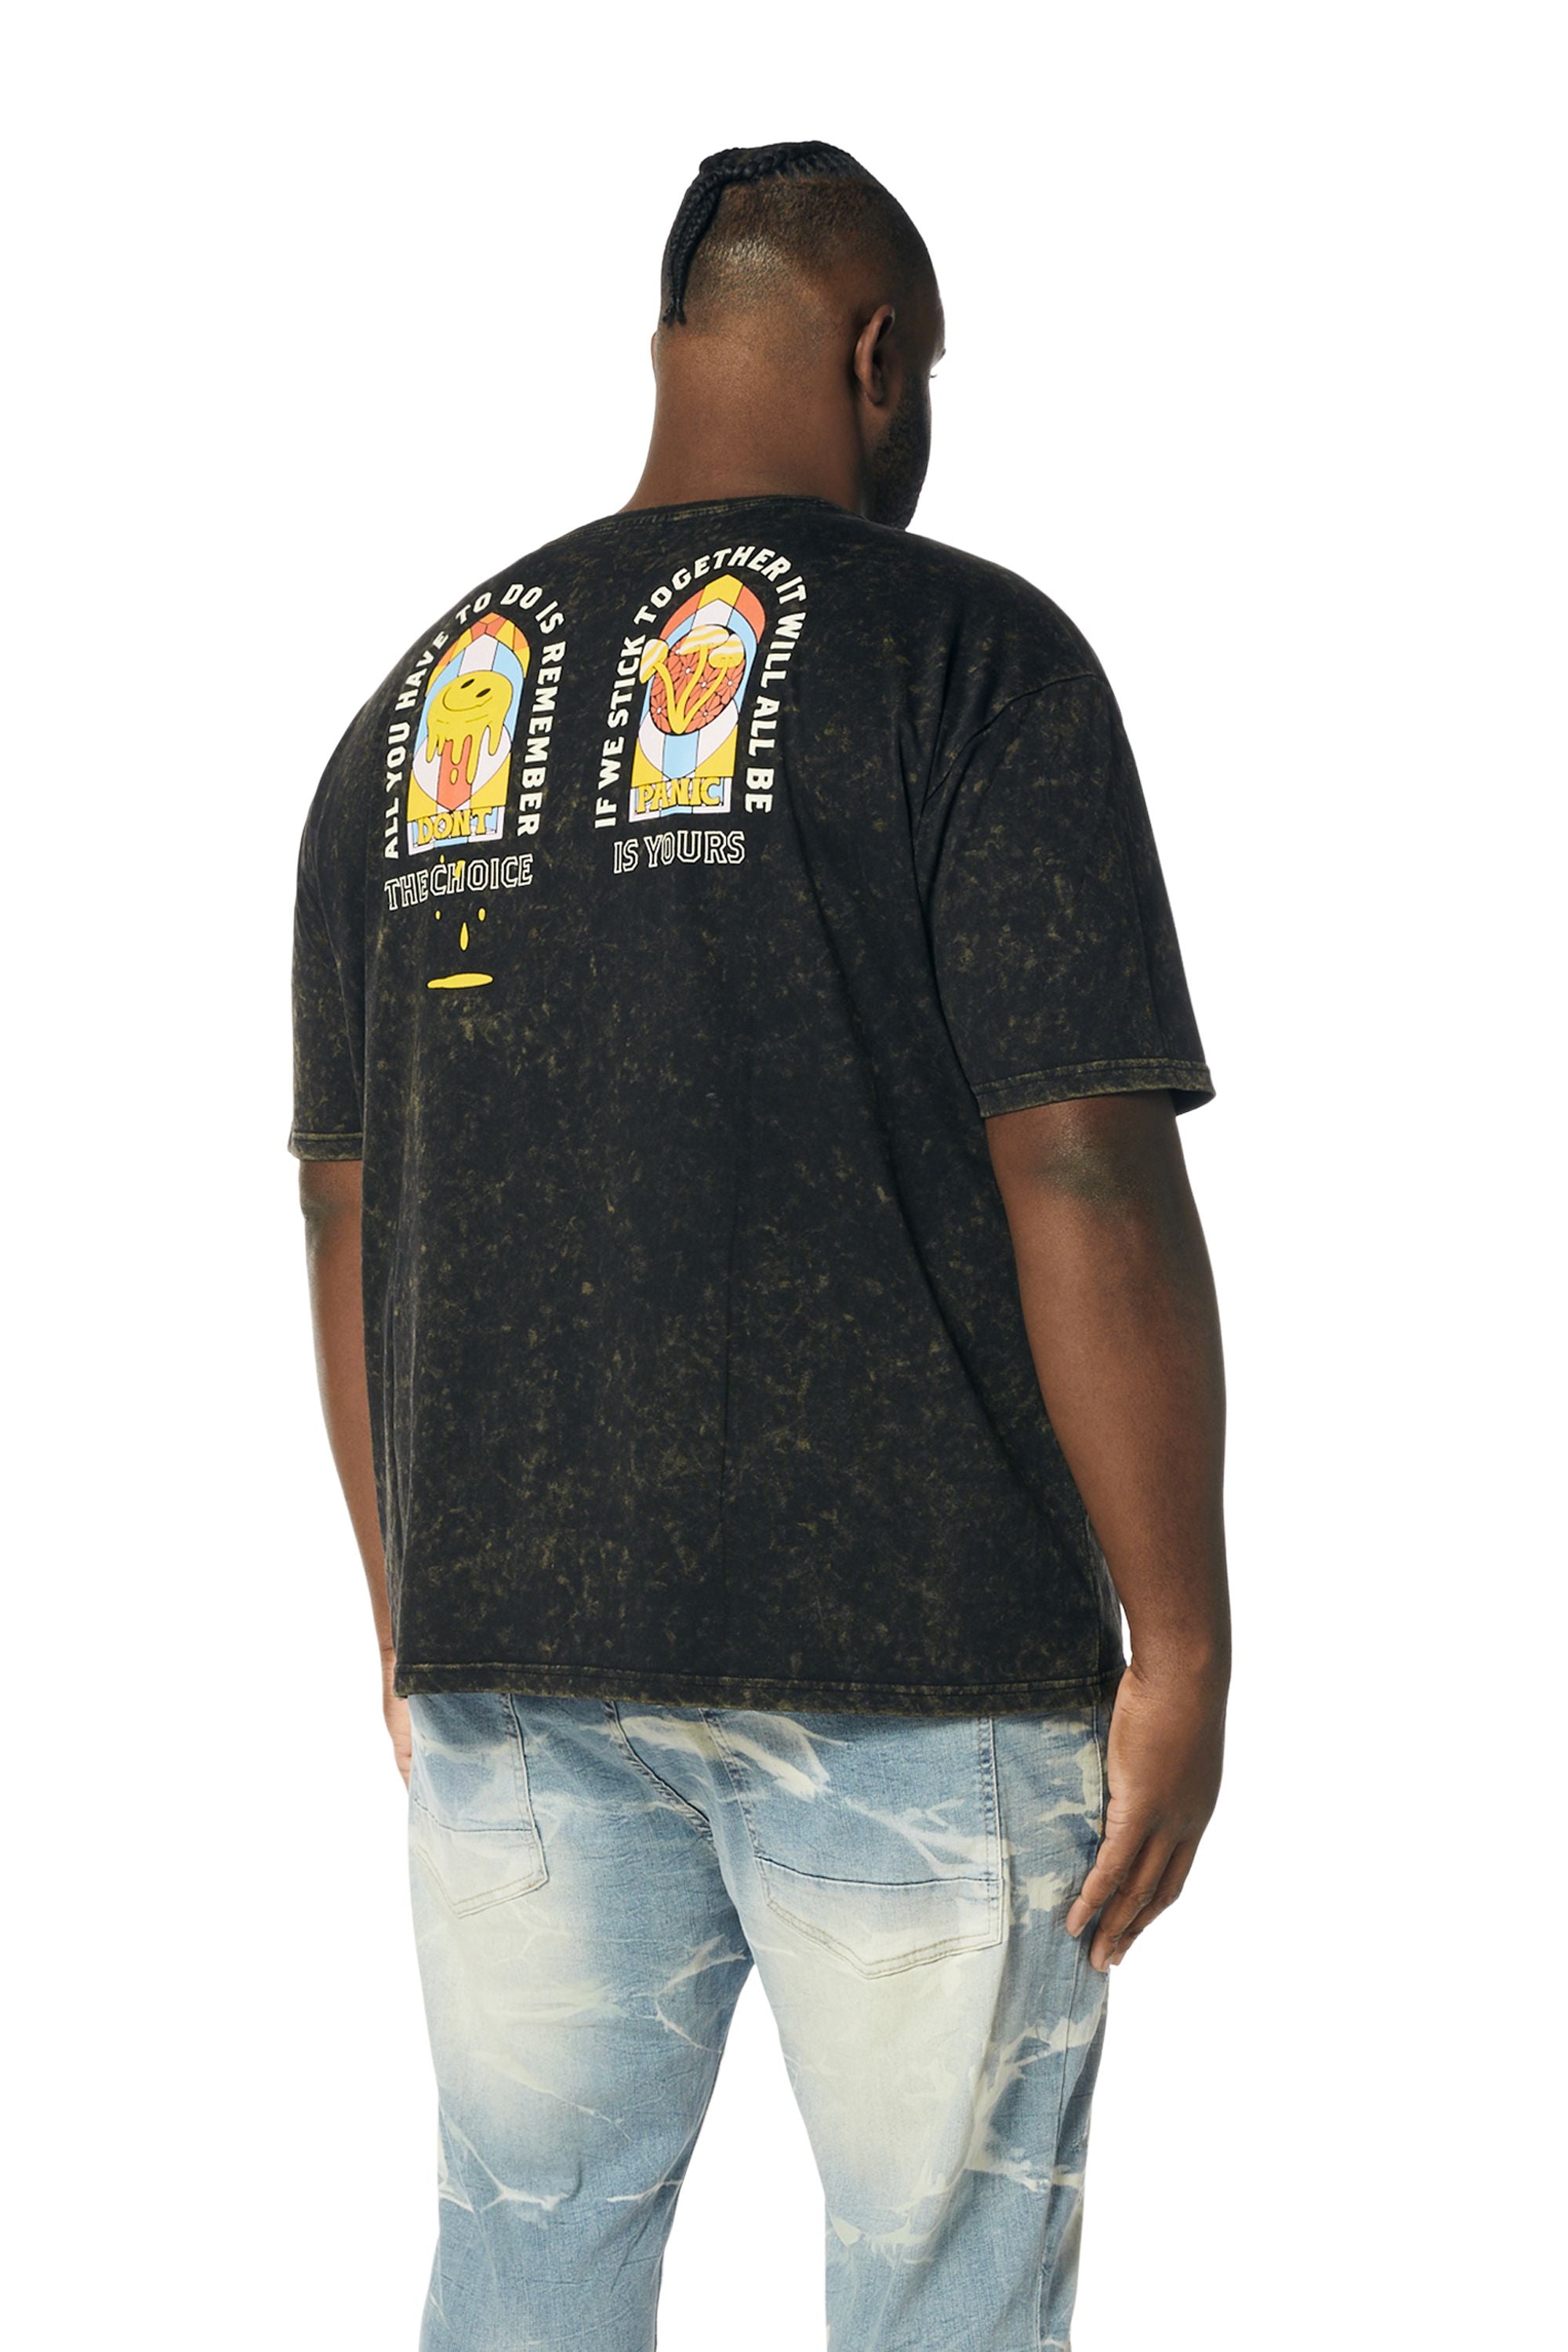 Big and Tall - Embroidered Patched & Graphic Printed T-Shirt - Black